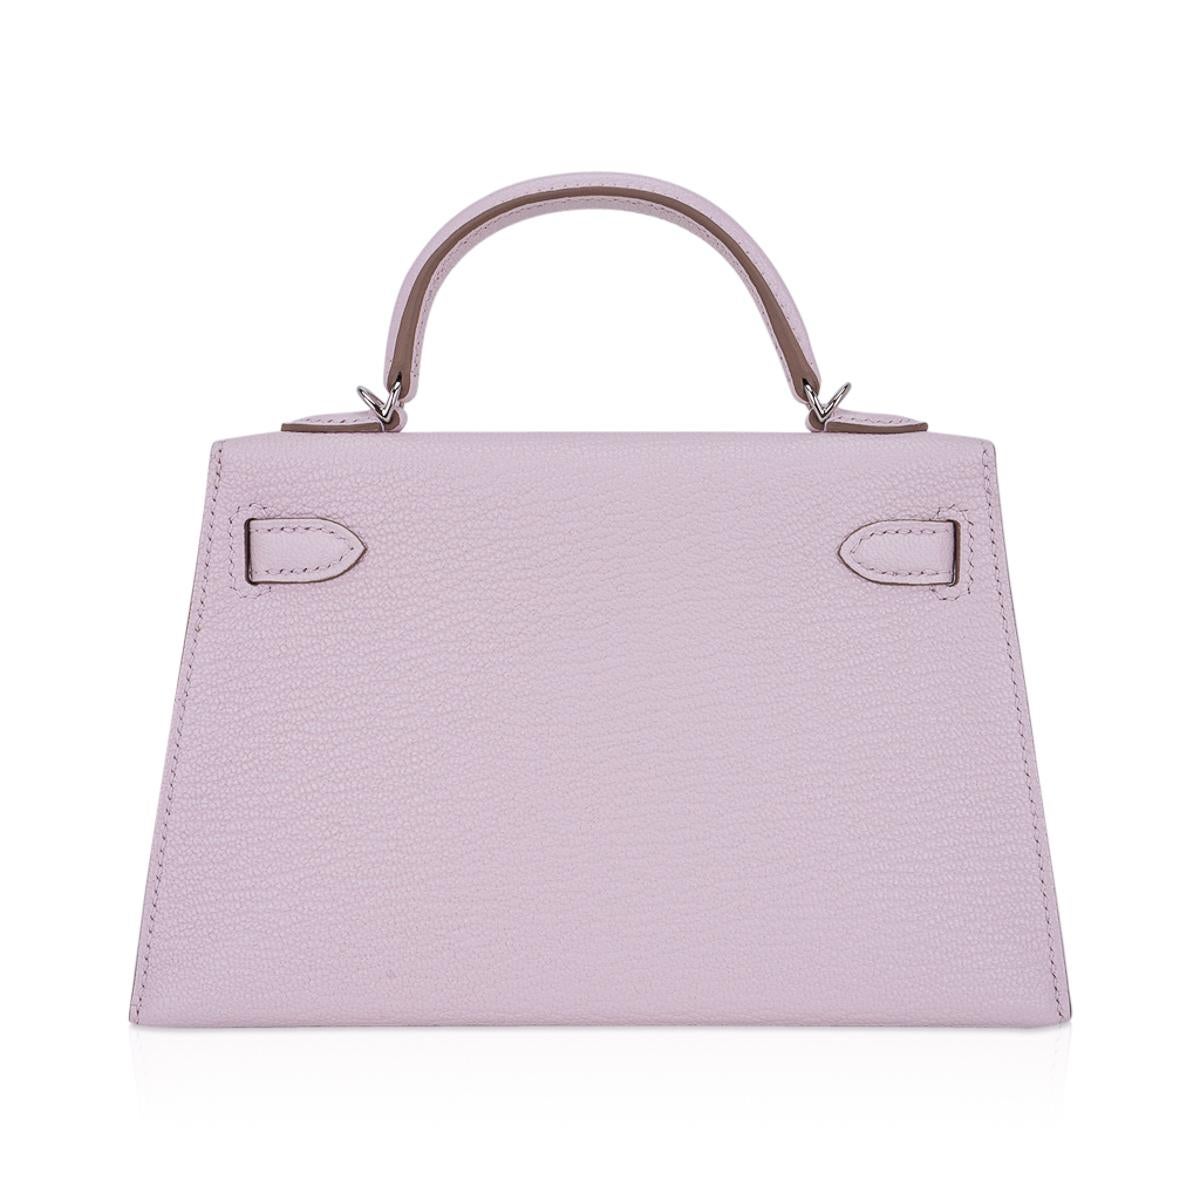 Hermes Kelly 20 Sellier Mauve Pale Mini Bag Palladium Hardware Chevre Leather In New Condition For Sale In Miami, FL